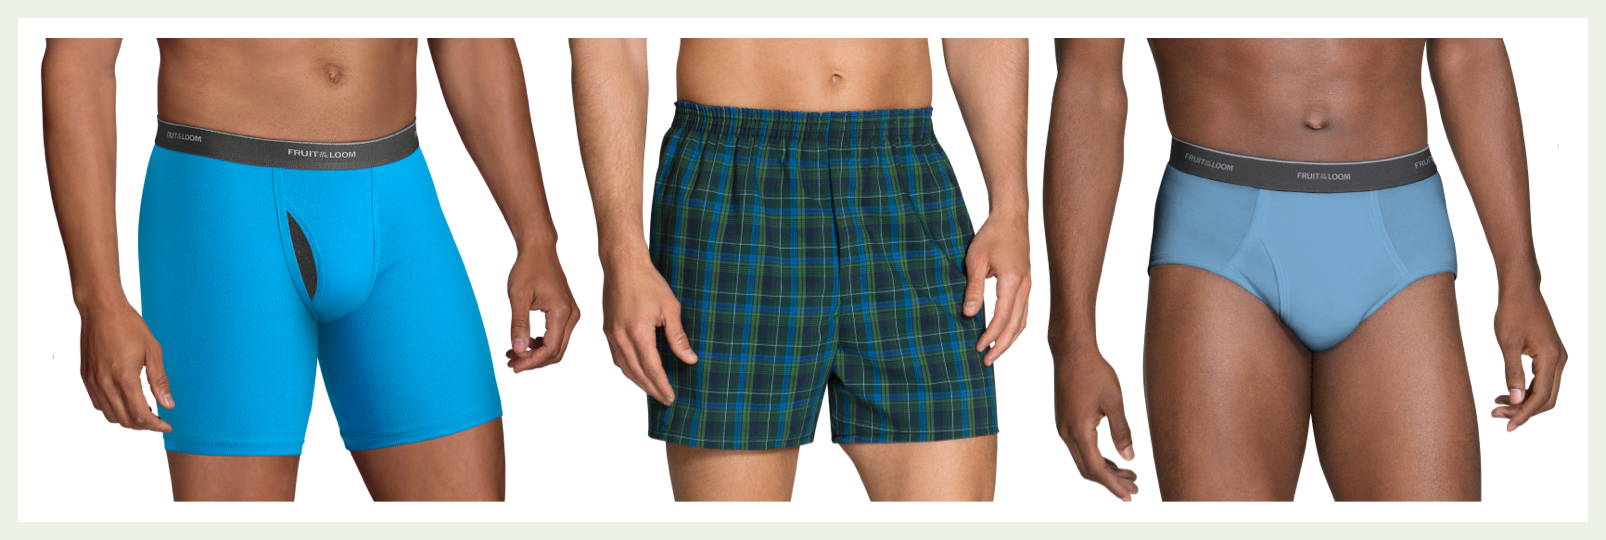 Men's Briefs and Boxers